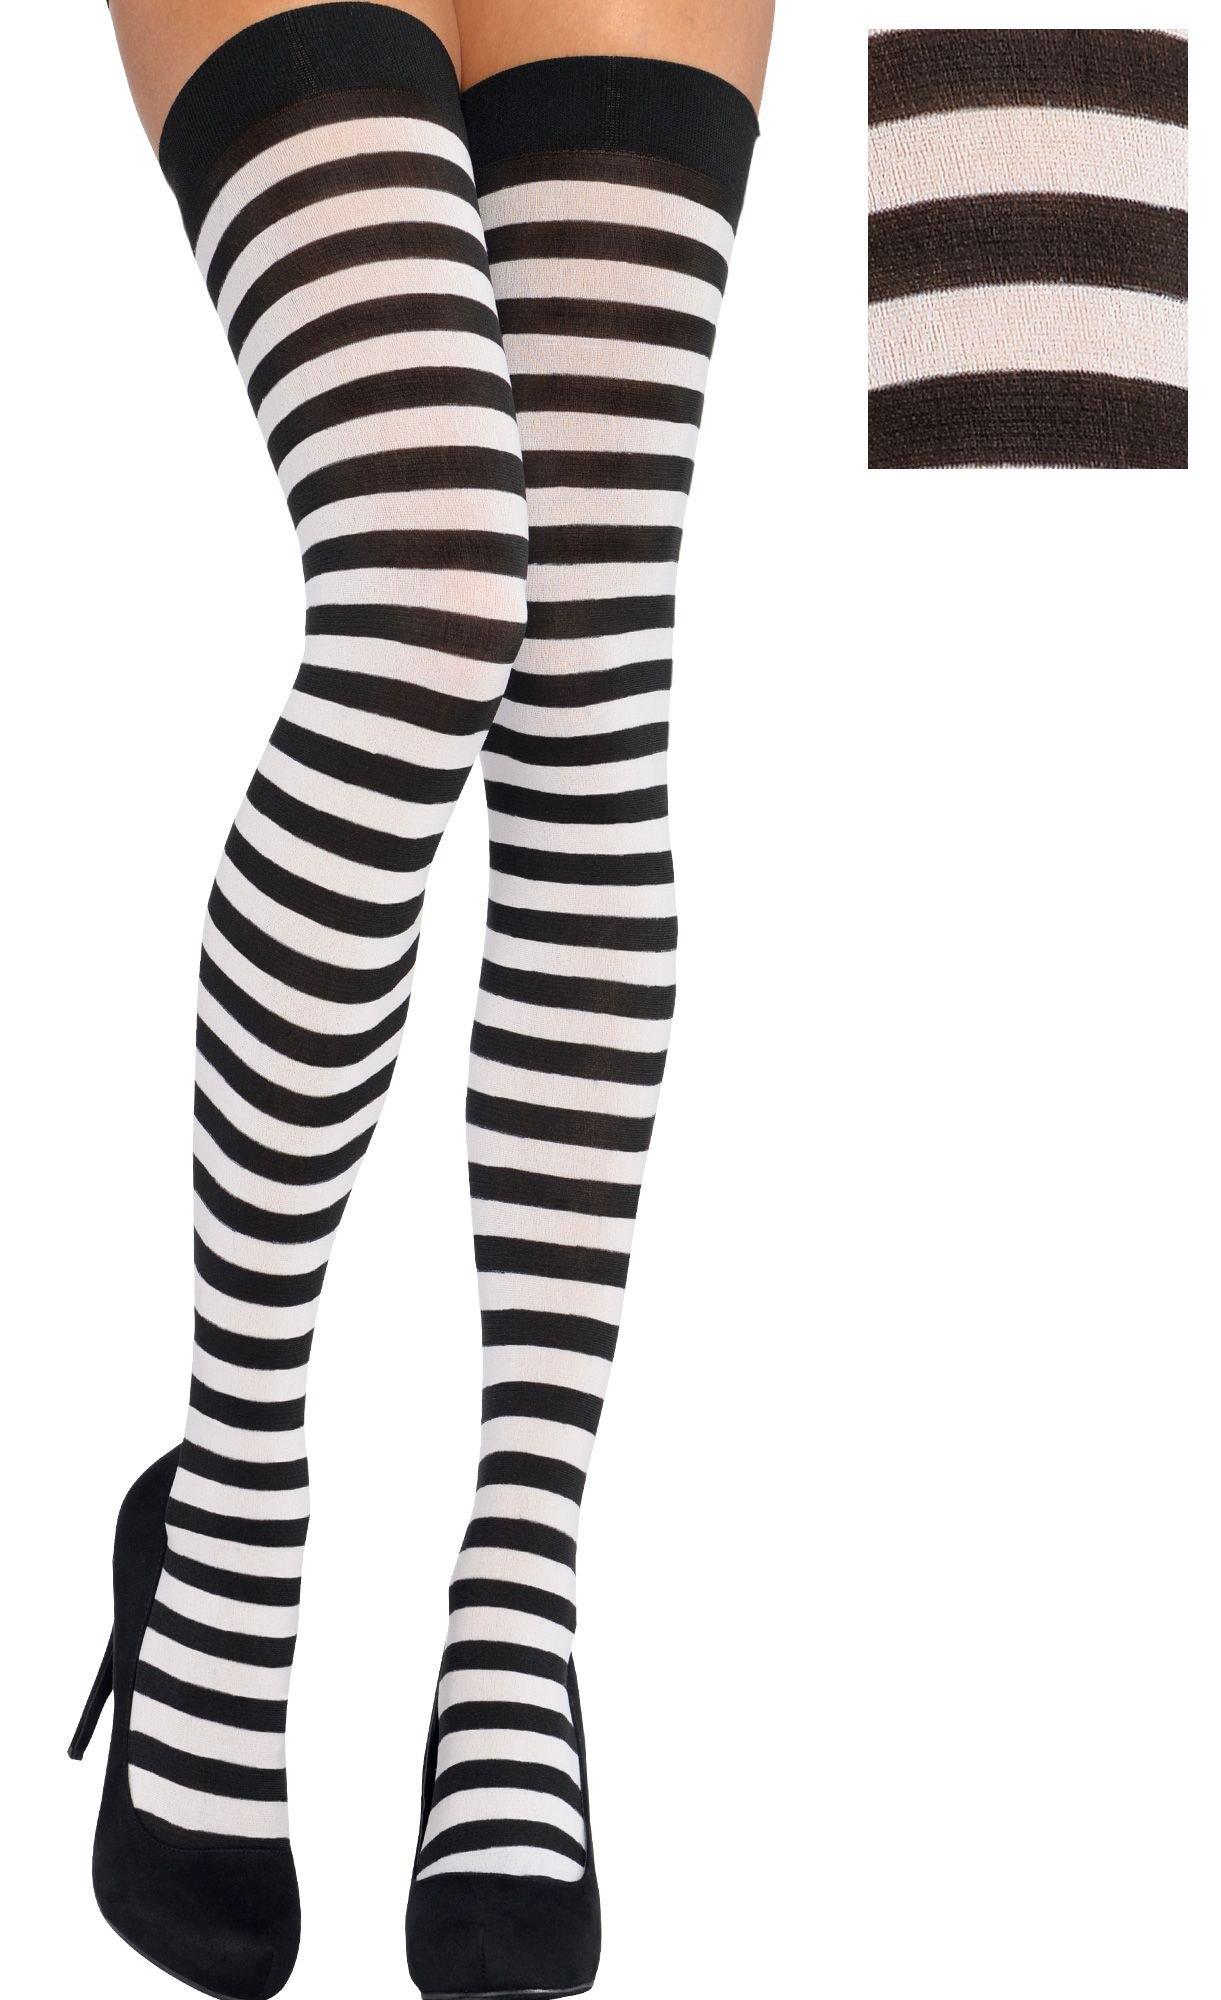 Adult Black & White Striped Thigh-High Stockings | Party City